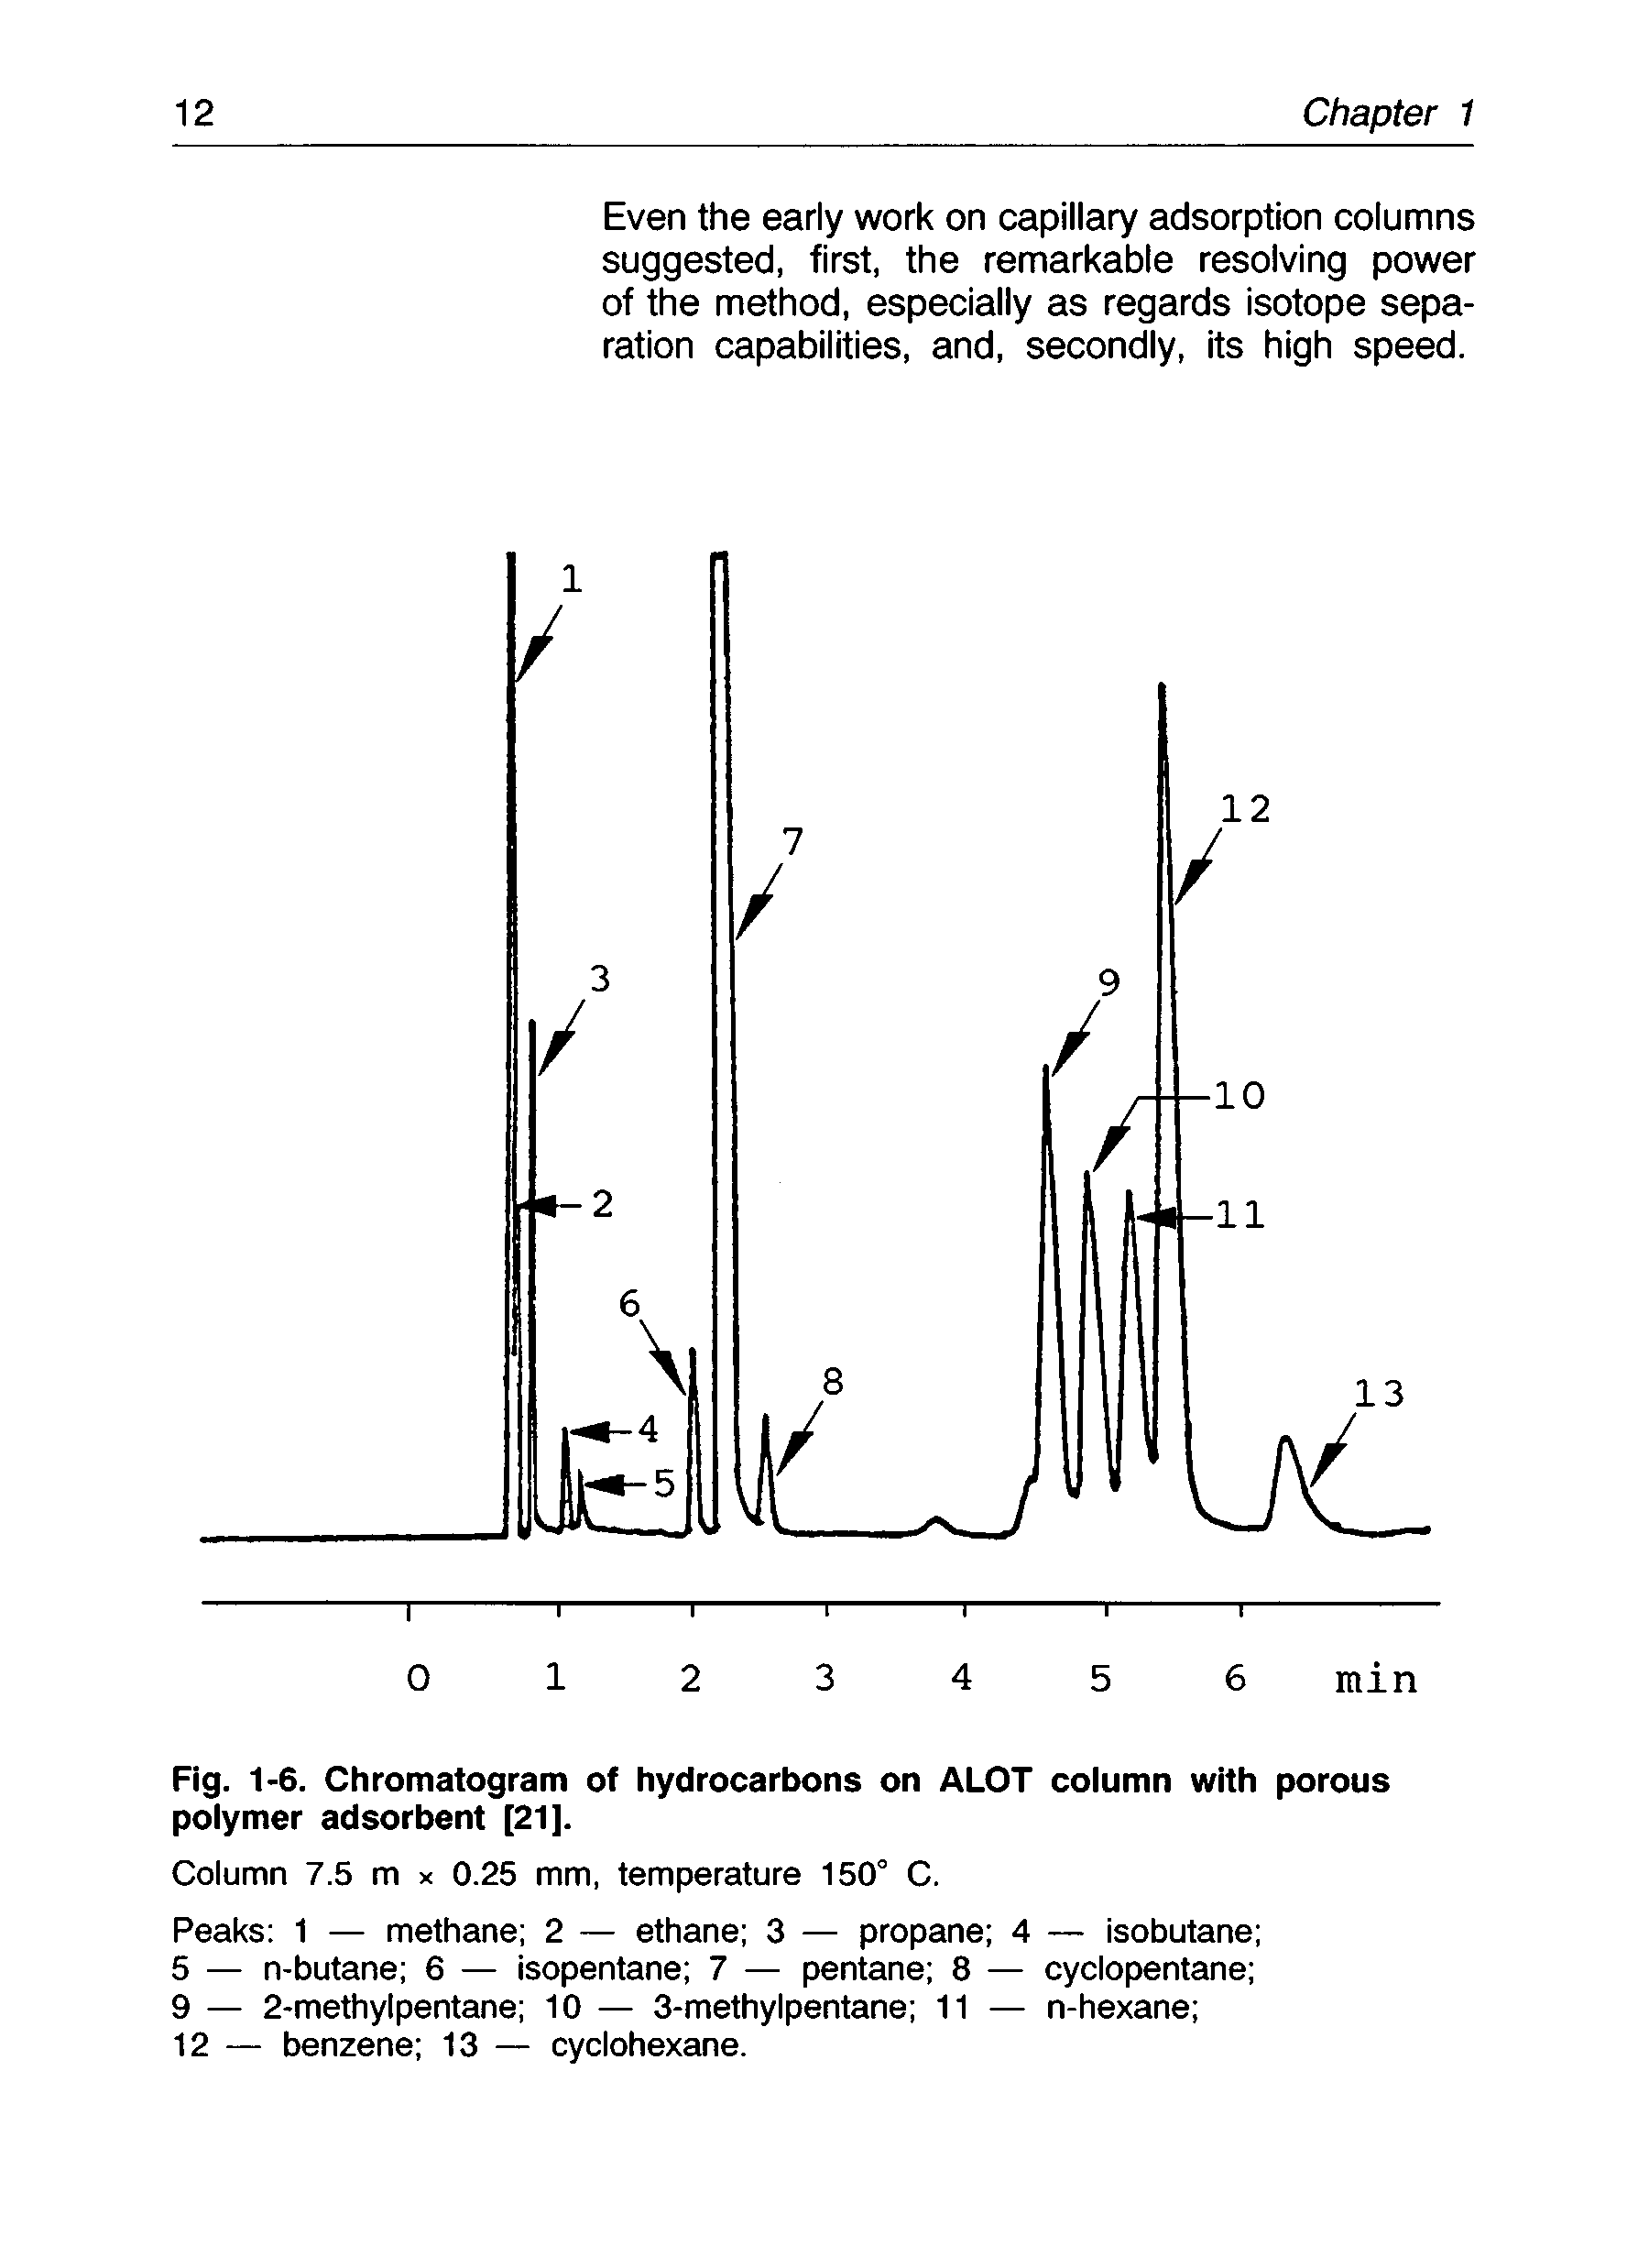 Fig. 1-6. Chromatogram of hydrocarbons on ALOT column with porous polymer adsorbent [21].